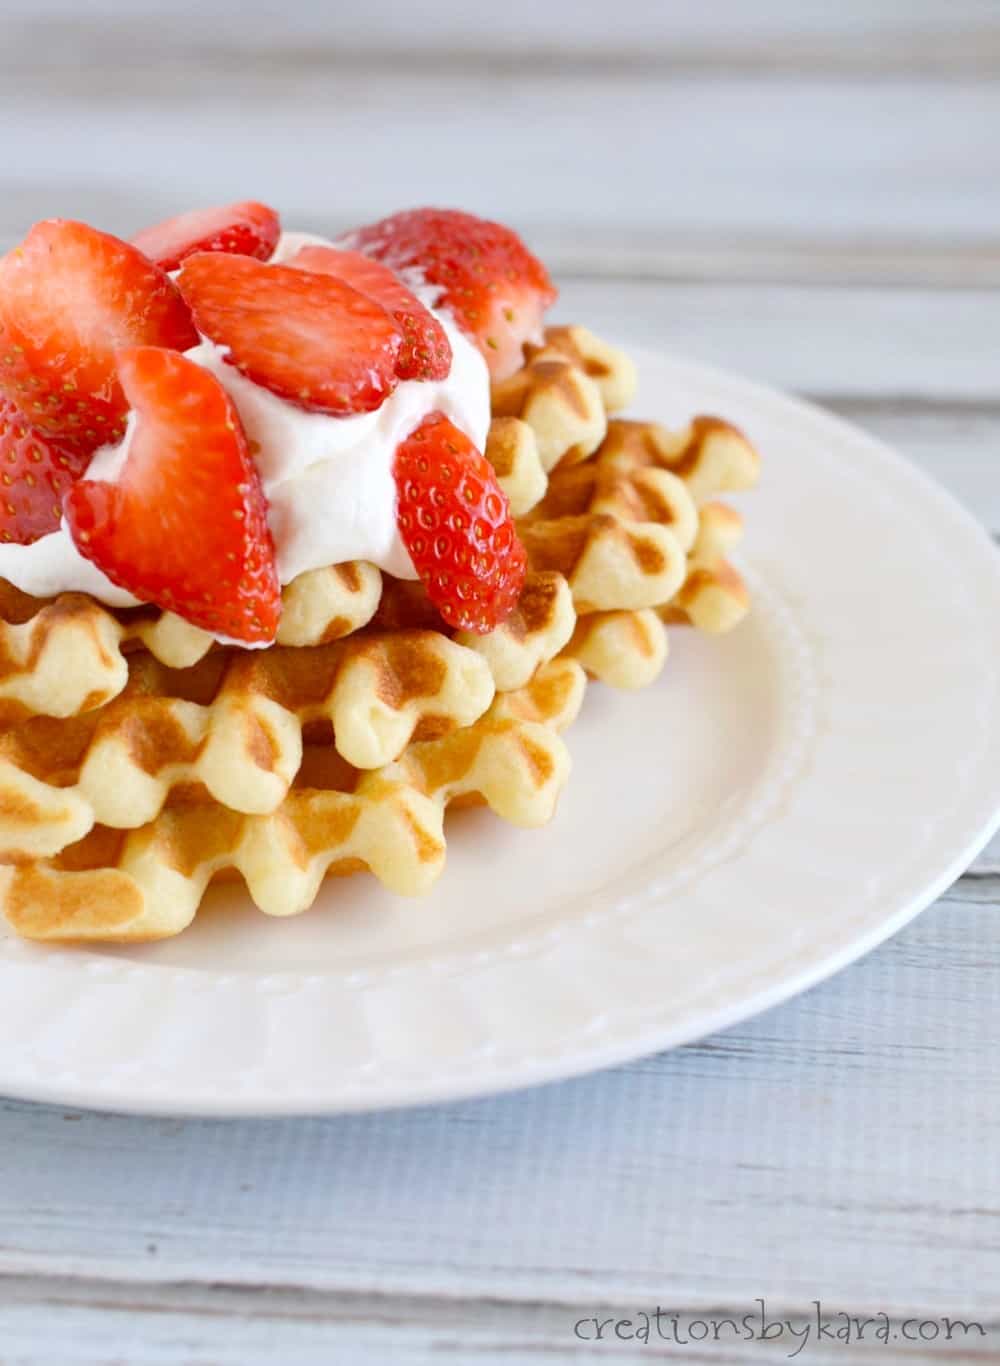 Really Good Waffles Made From Scratch - Creations by Kara